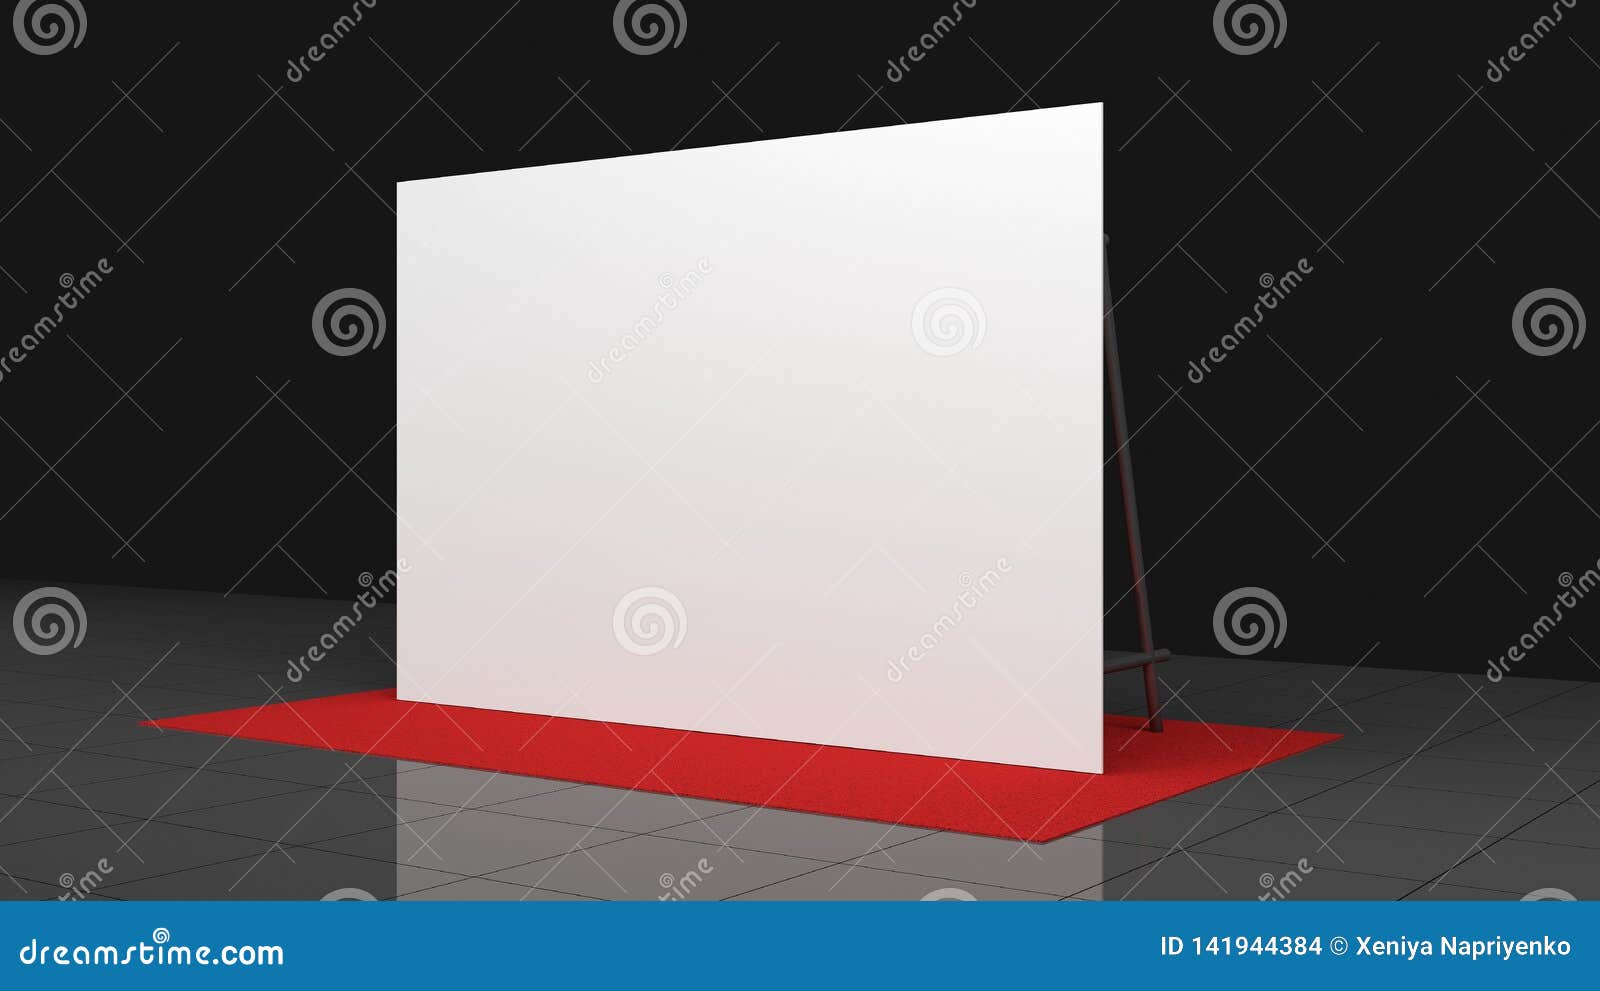 Download Backdrop, Press Banner 2x3 Meters With Red Carpit. 3d Render Template. Mockup Stock Photo ...